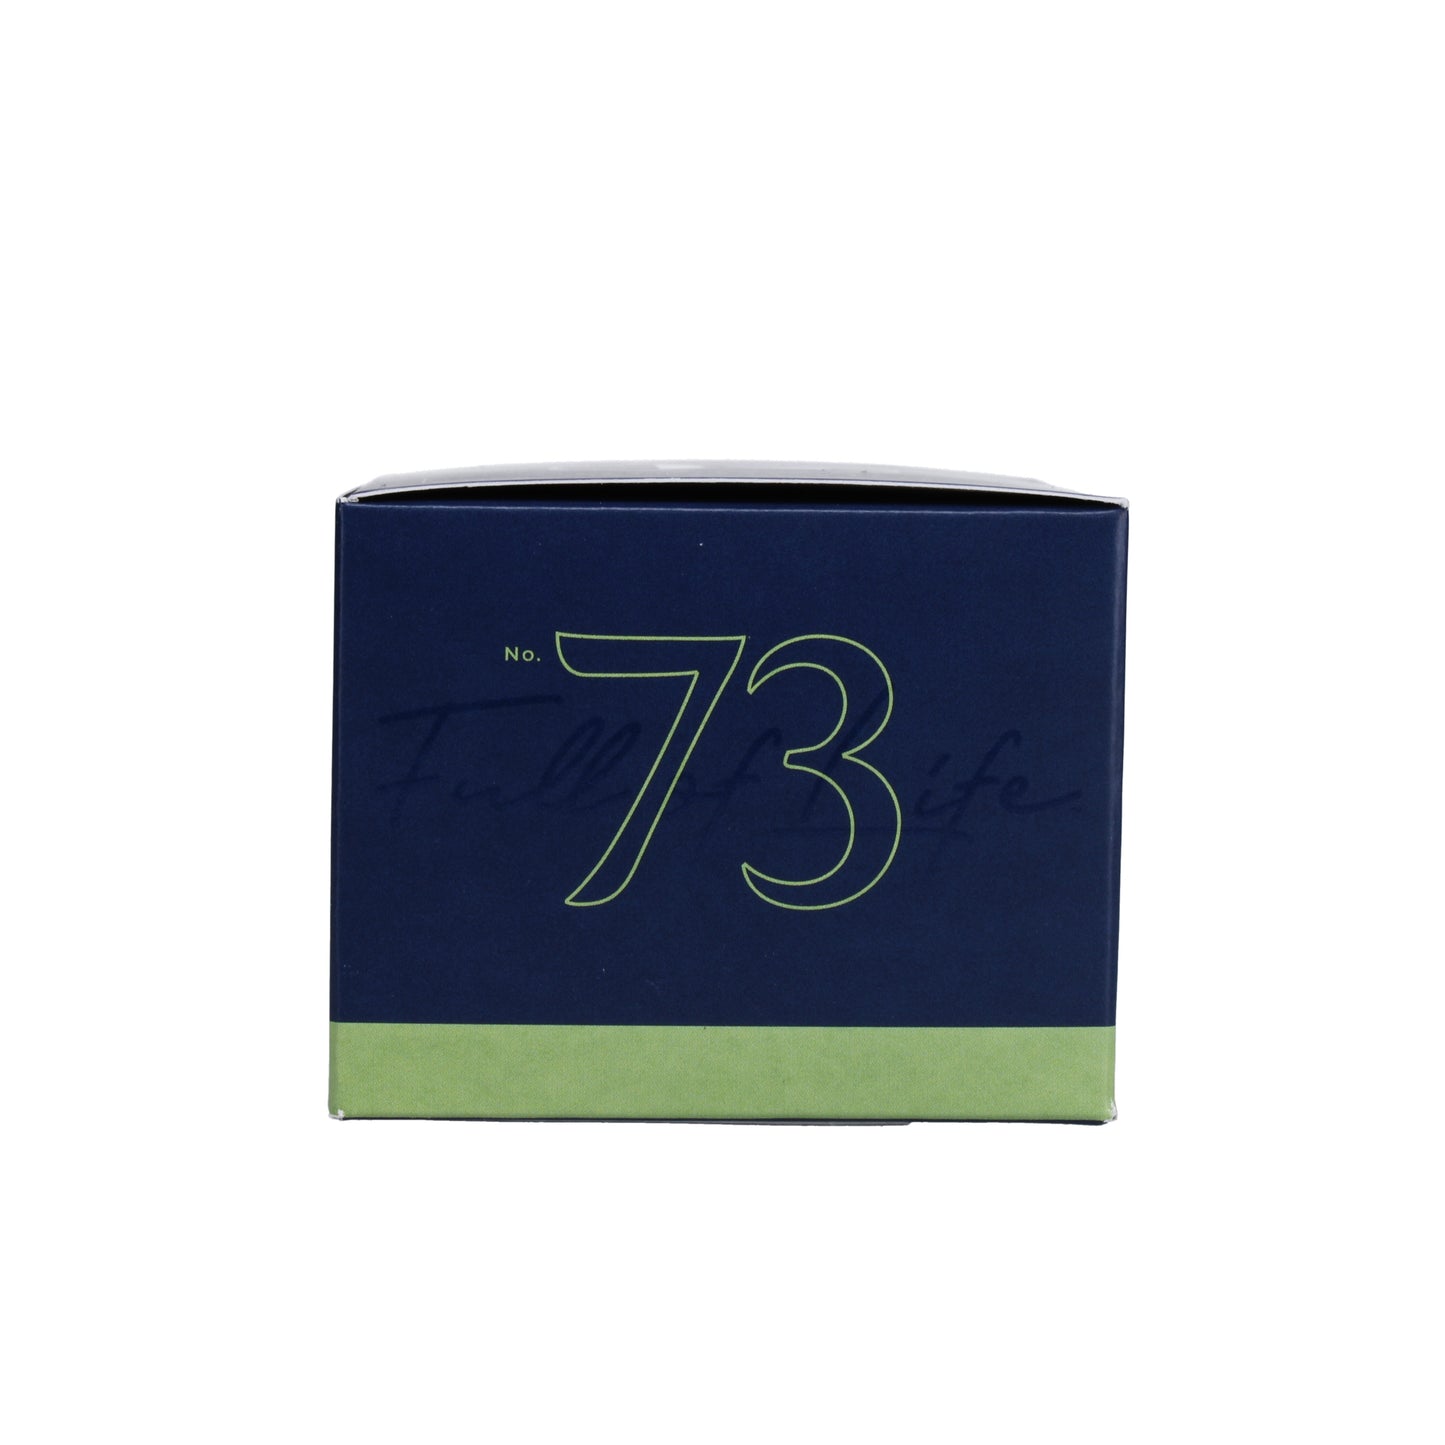 No. 73 Vetiver Seagrass 3.75 oz. Small Poured Candle Image 6